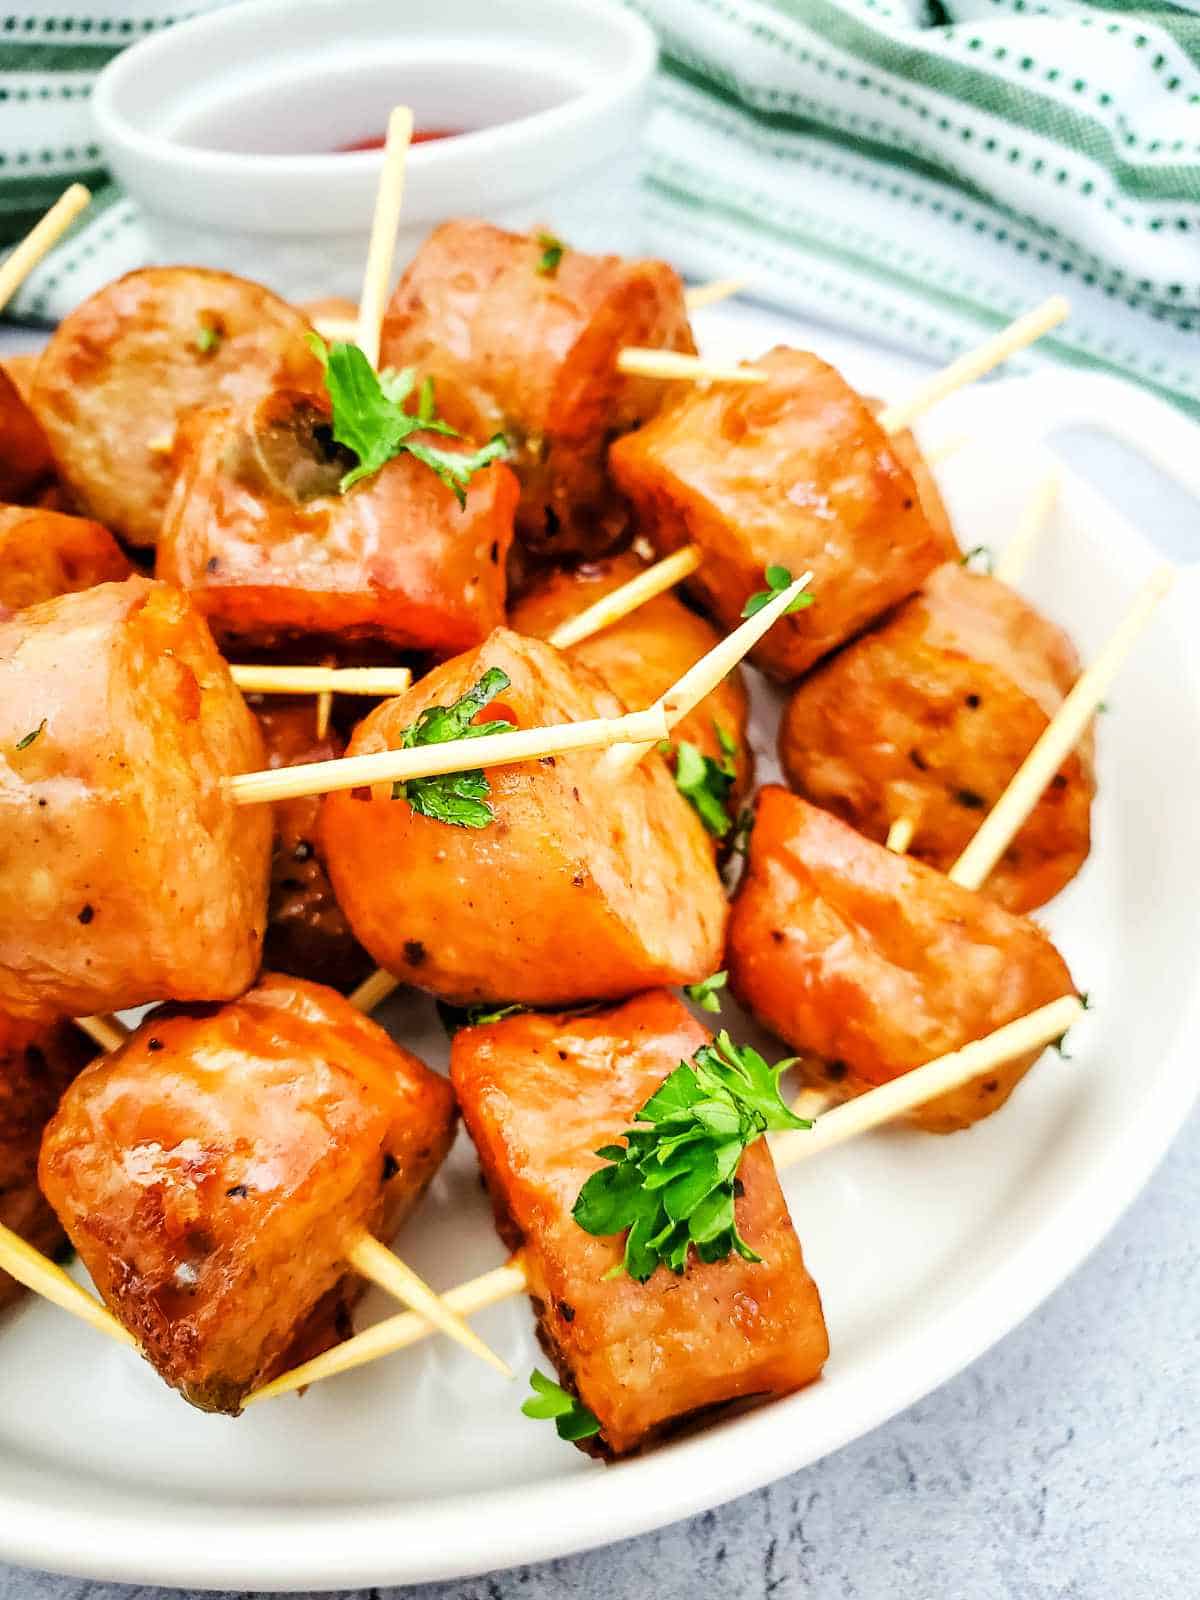 Plate of toothpick speared chicken sausage bites with parsley garnish.